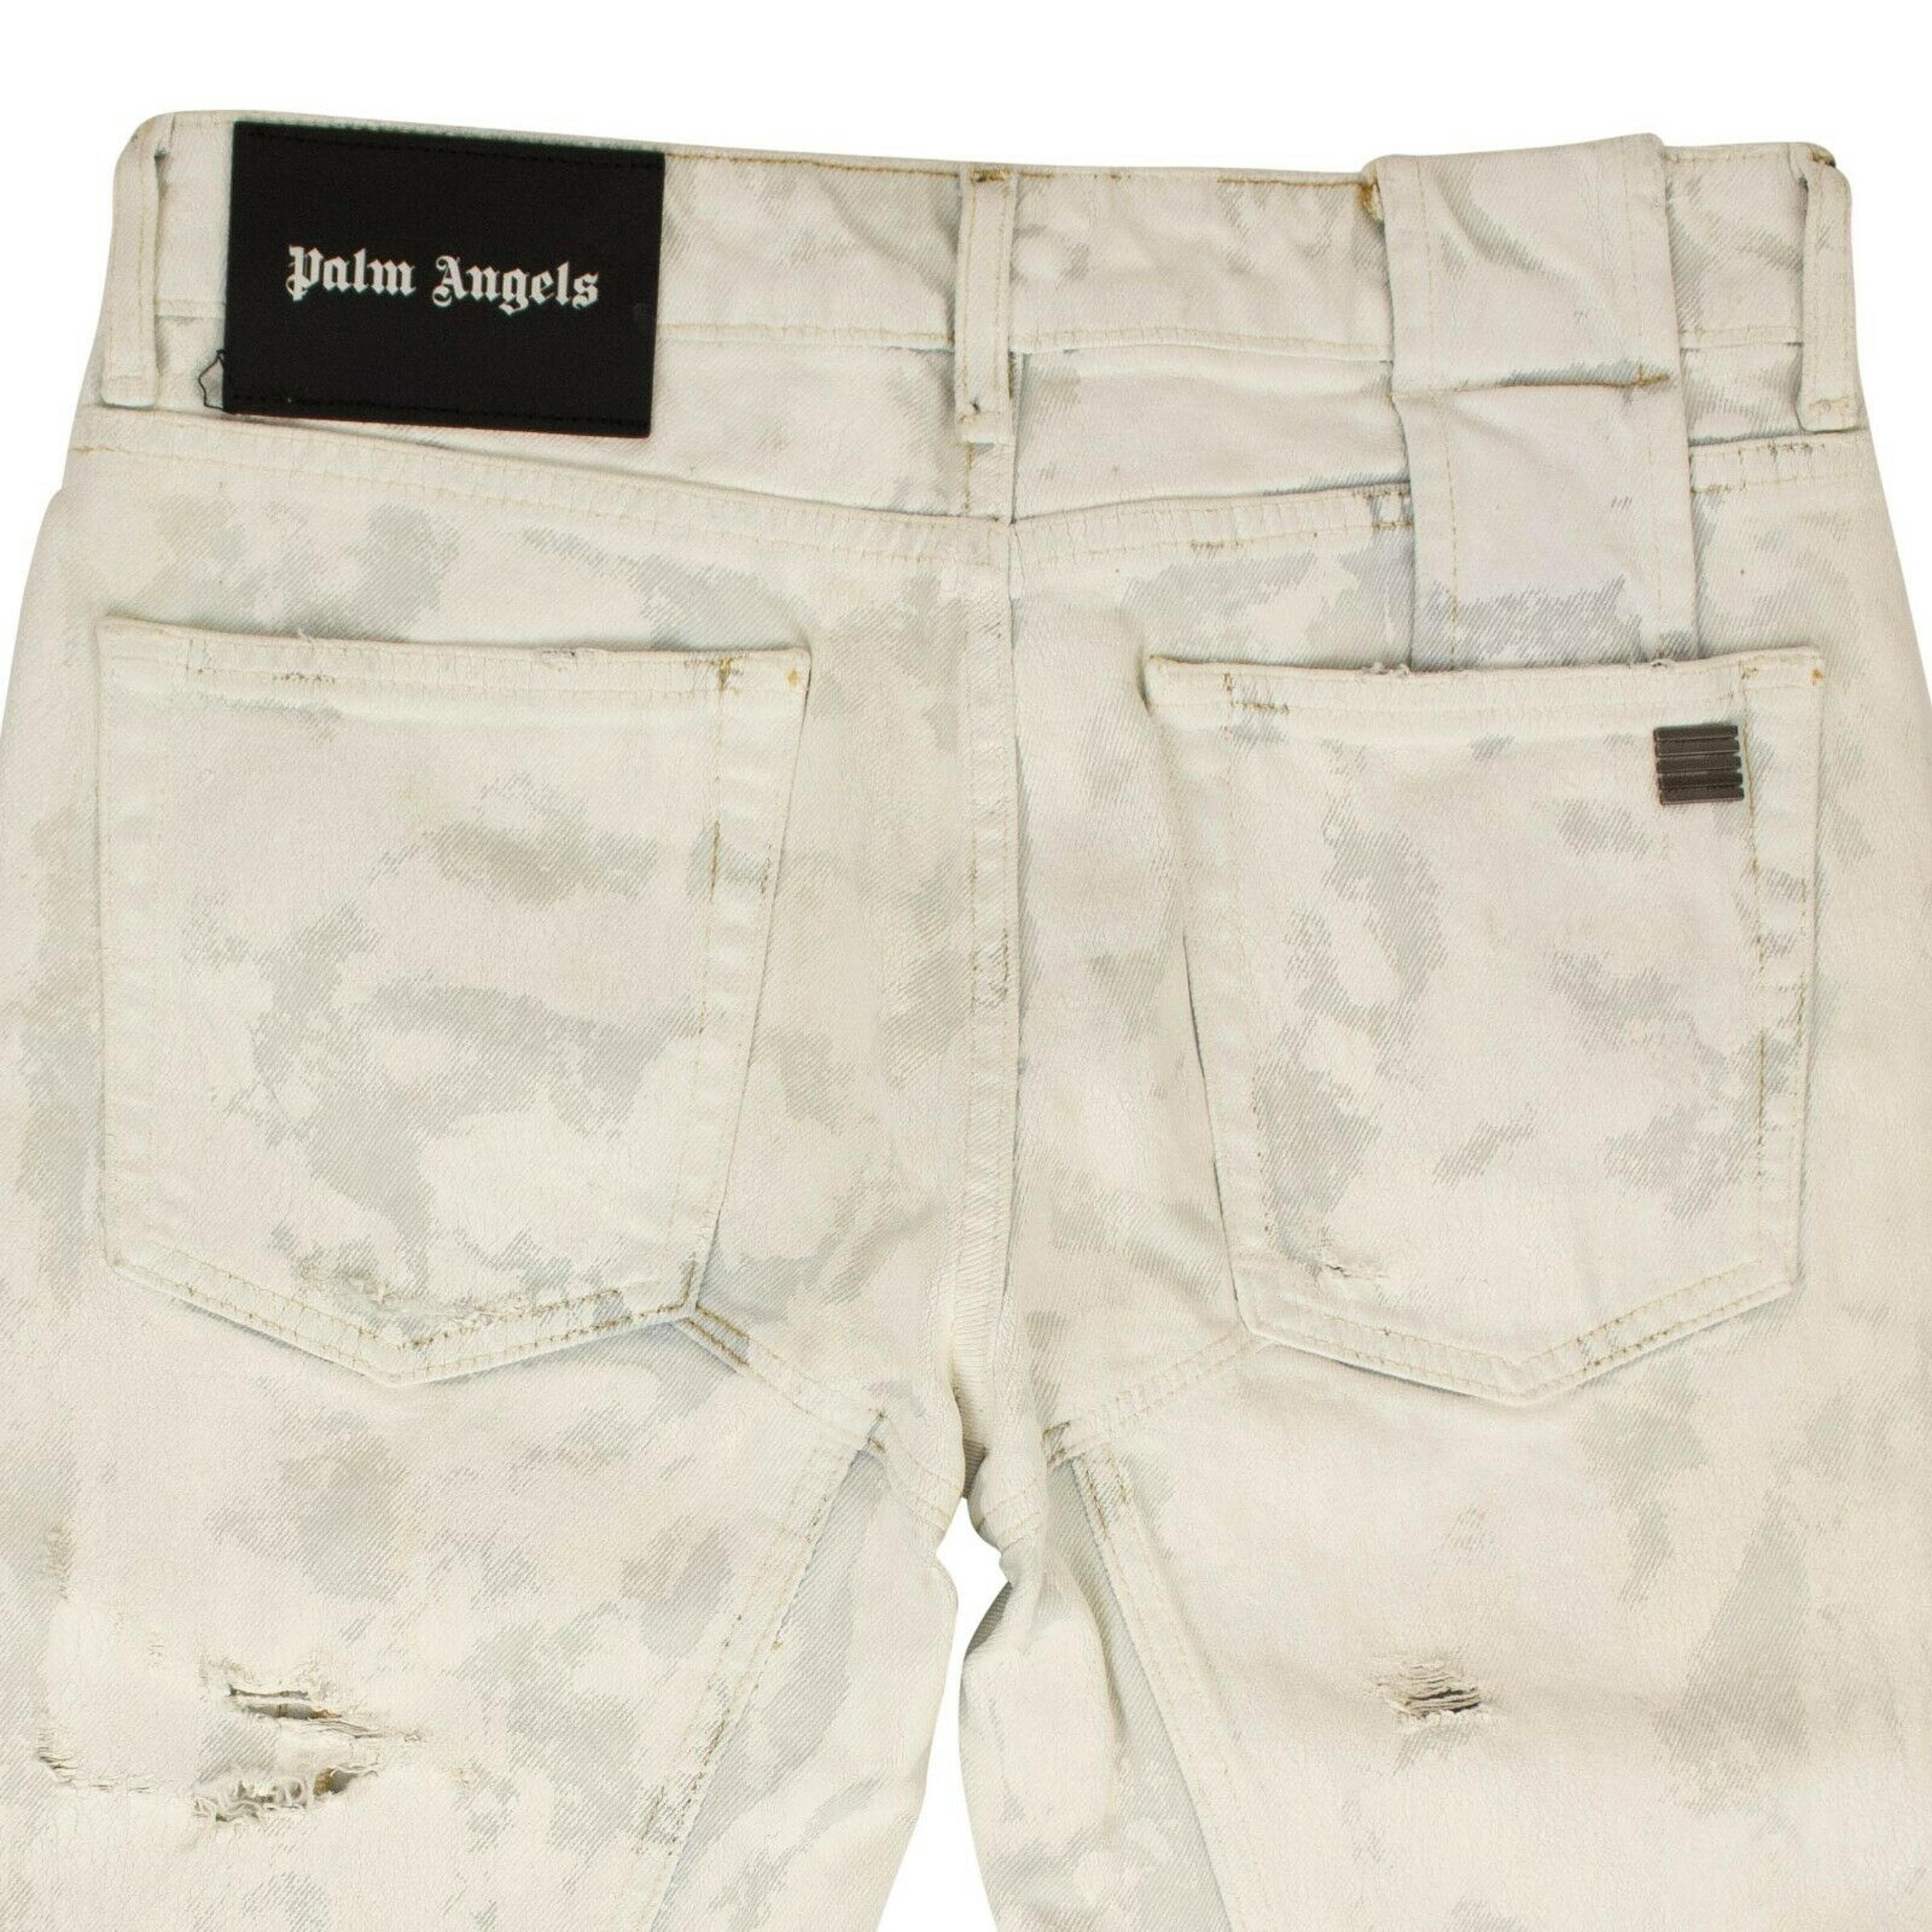 Alternate View 3 of Women's Blue And White Tie Dye Distressed Jeans